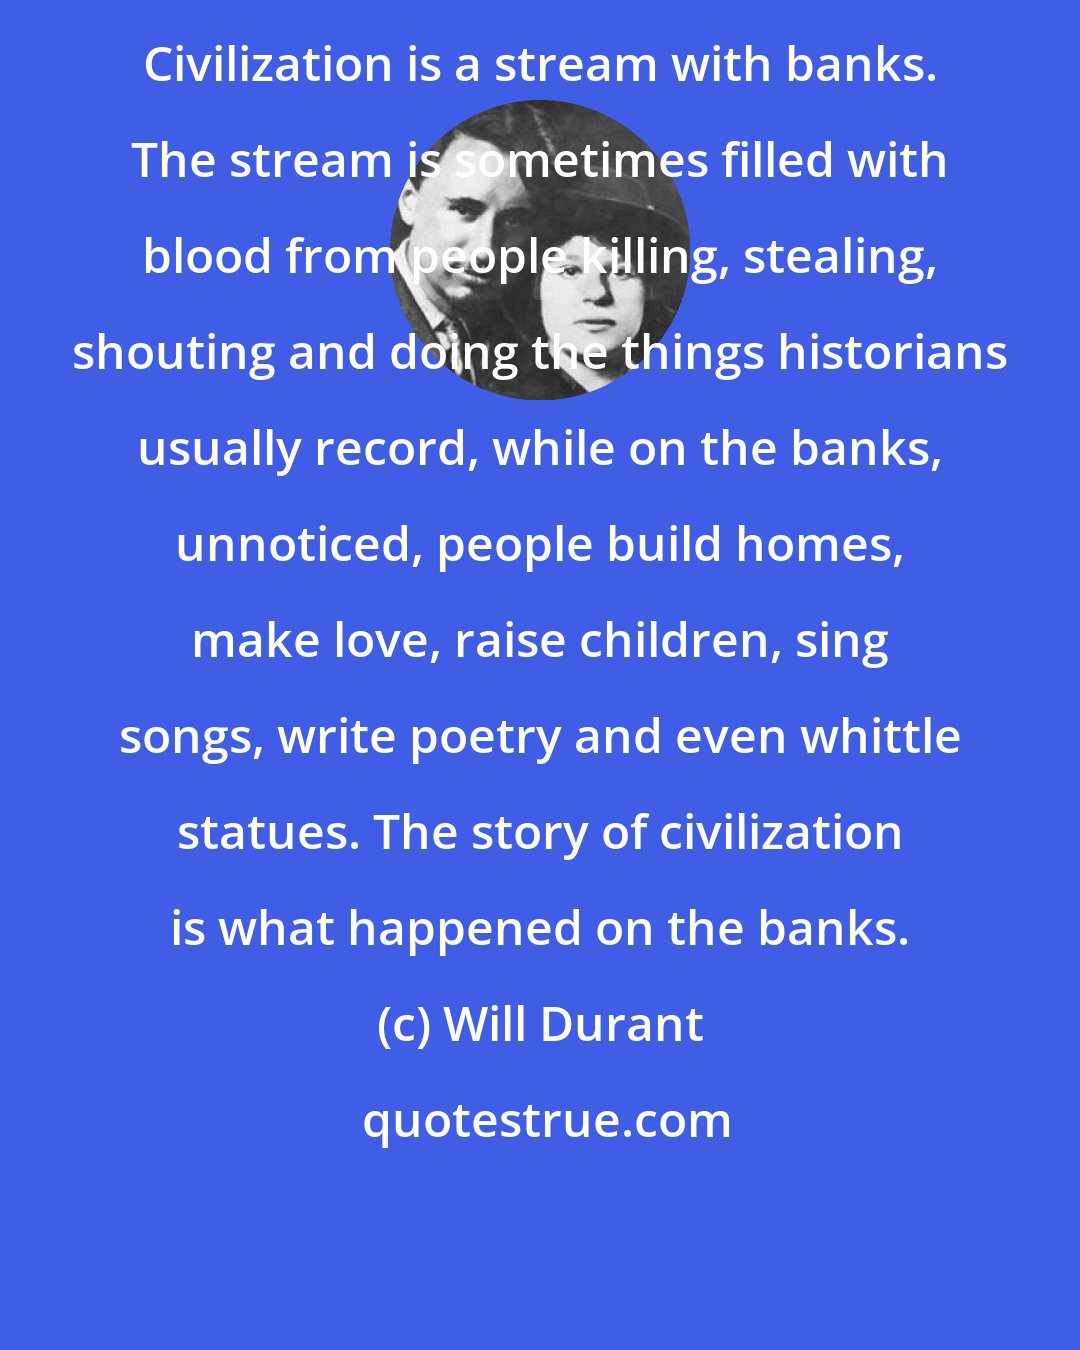 Will Durant: Civilization is a stream with banks. The stream is sometimes filled with blood from people killing, stealing, shouting and doing the things historians usually record, while on the banks, unnoticed, people build homes, make love, raise children, sing songs, write poetry and even whittle statues. The story of civilization is what happened on the banks.